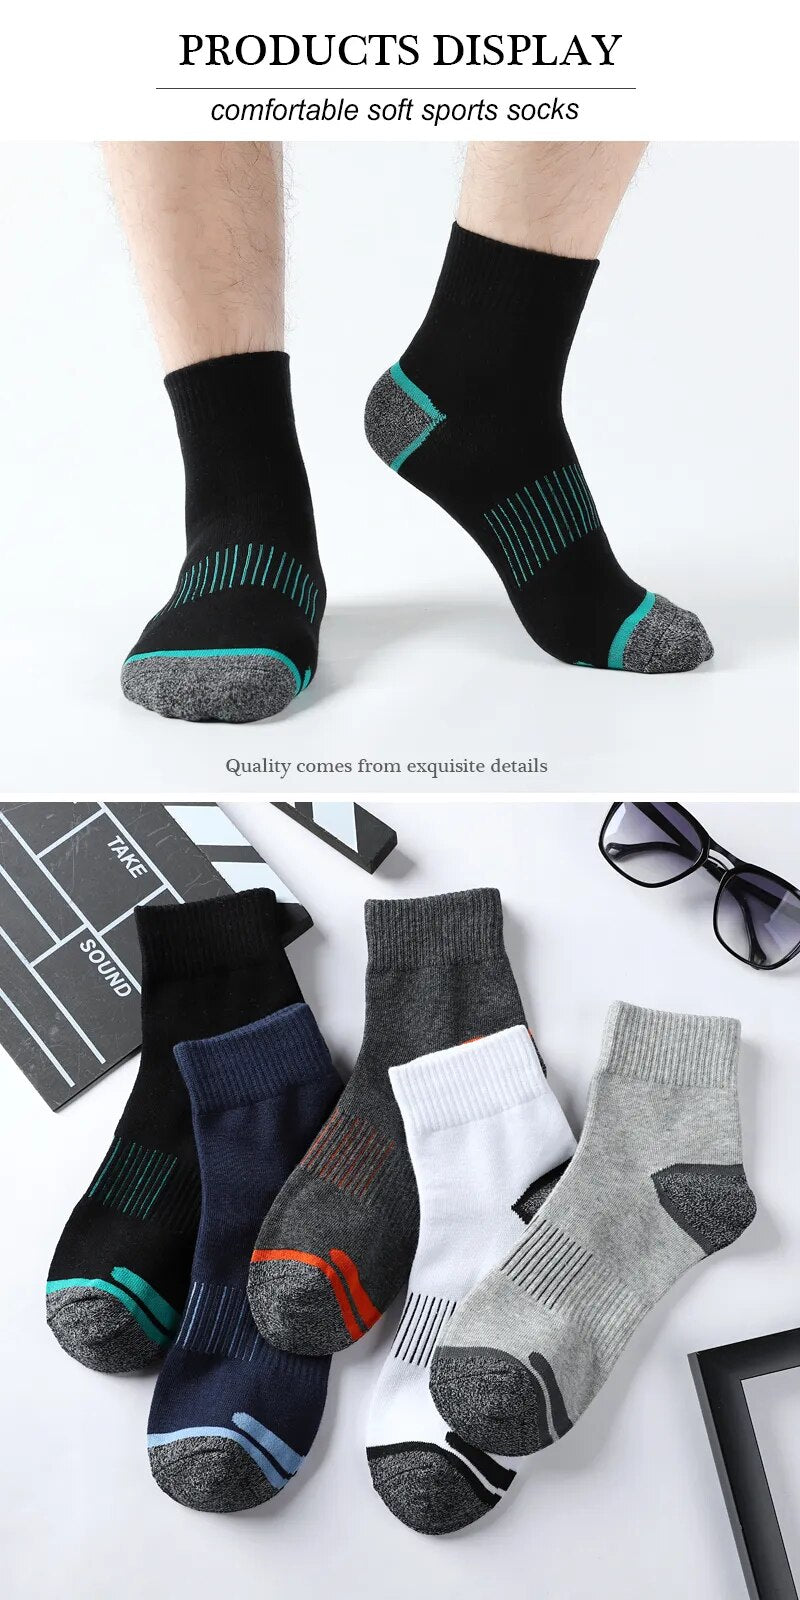 5 Pairs Of High Quality Men's Casual Cotton Breathable Socks Size 38-45..